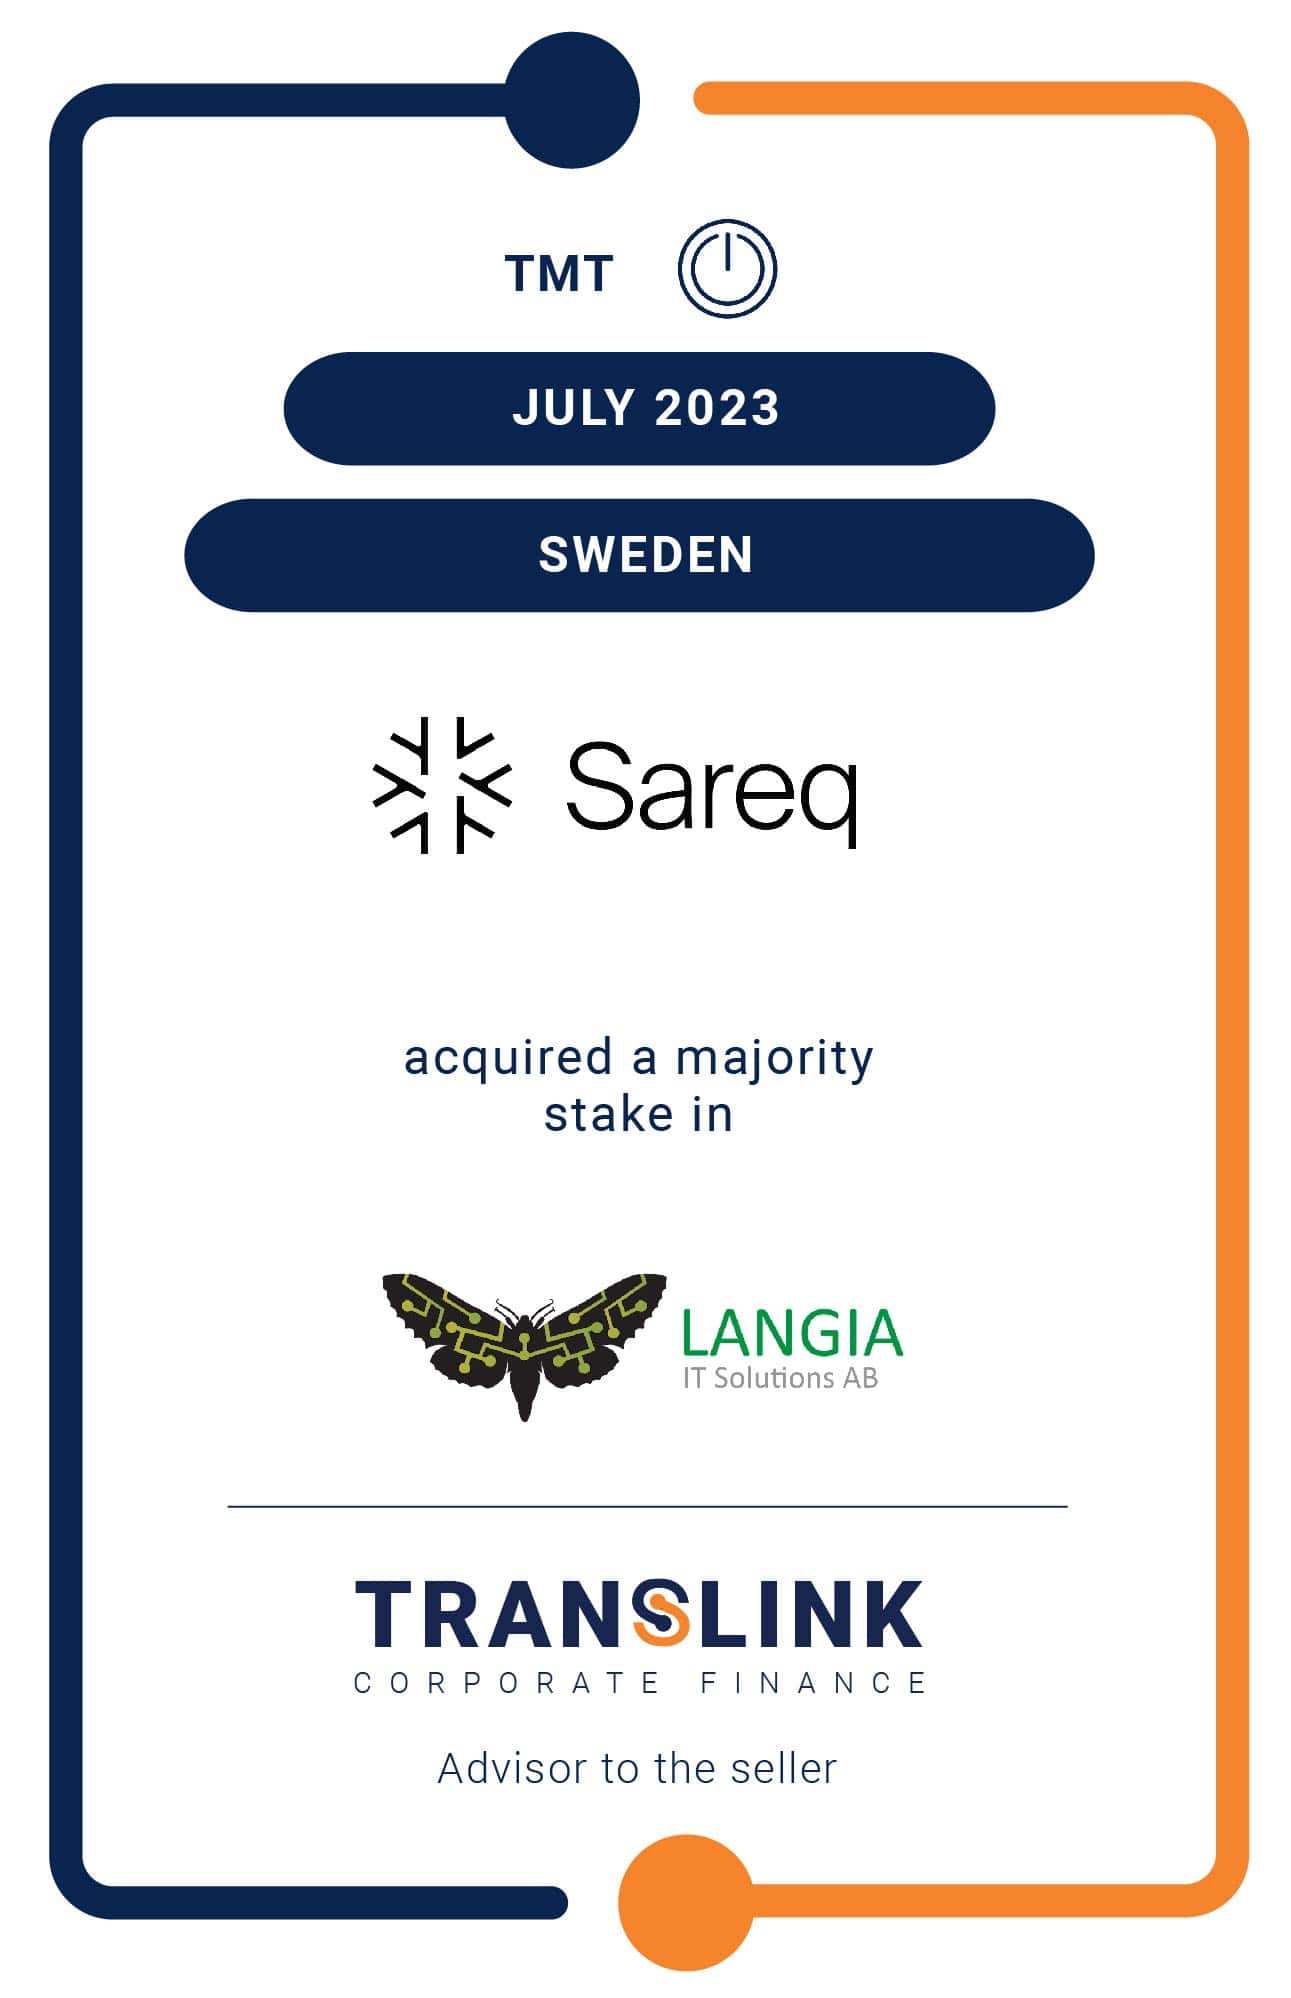 Translink Corporate Finance Exclusively Advised Langia IT Solutions On The Majority Stake Sale To Sareq